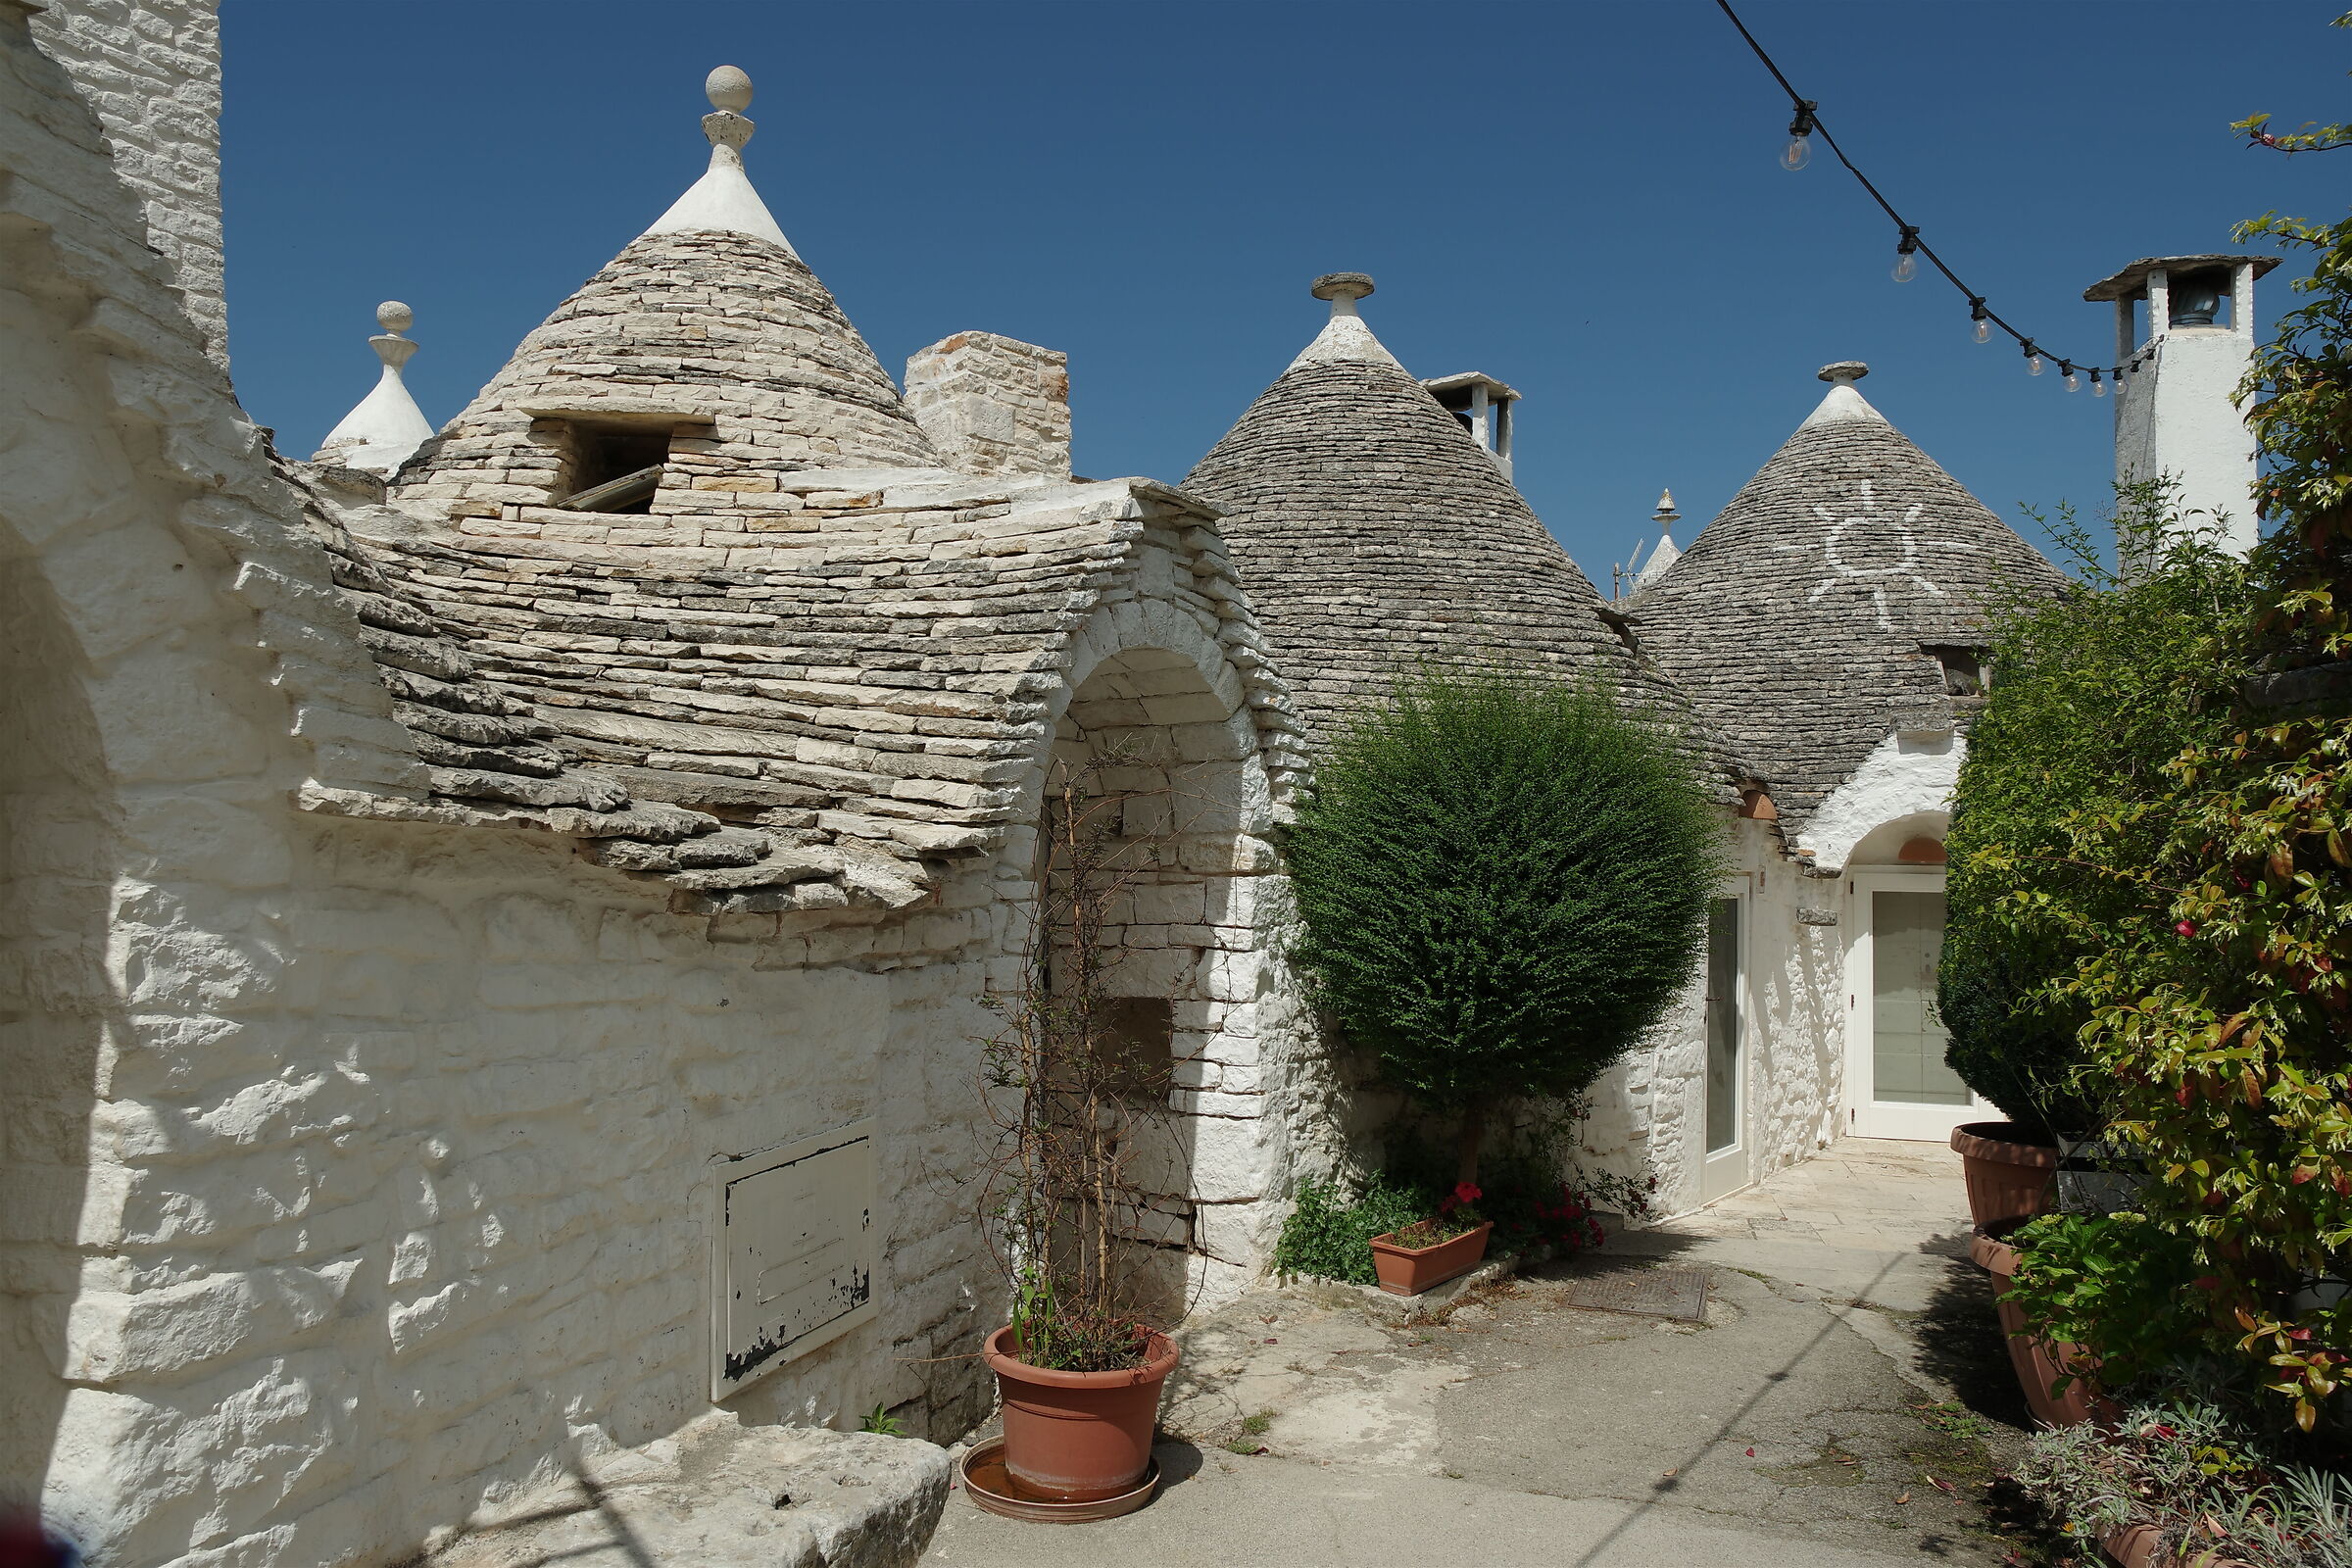 In the city of trulli...